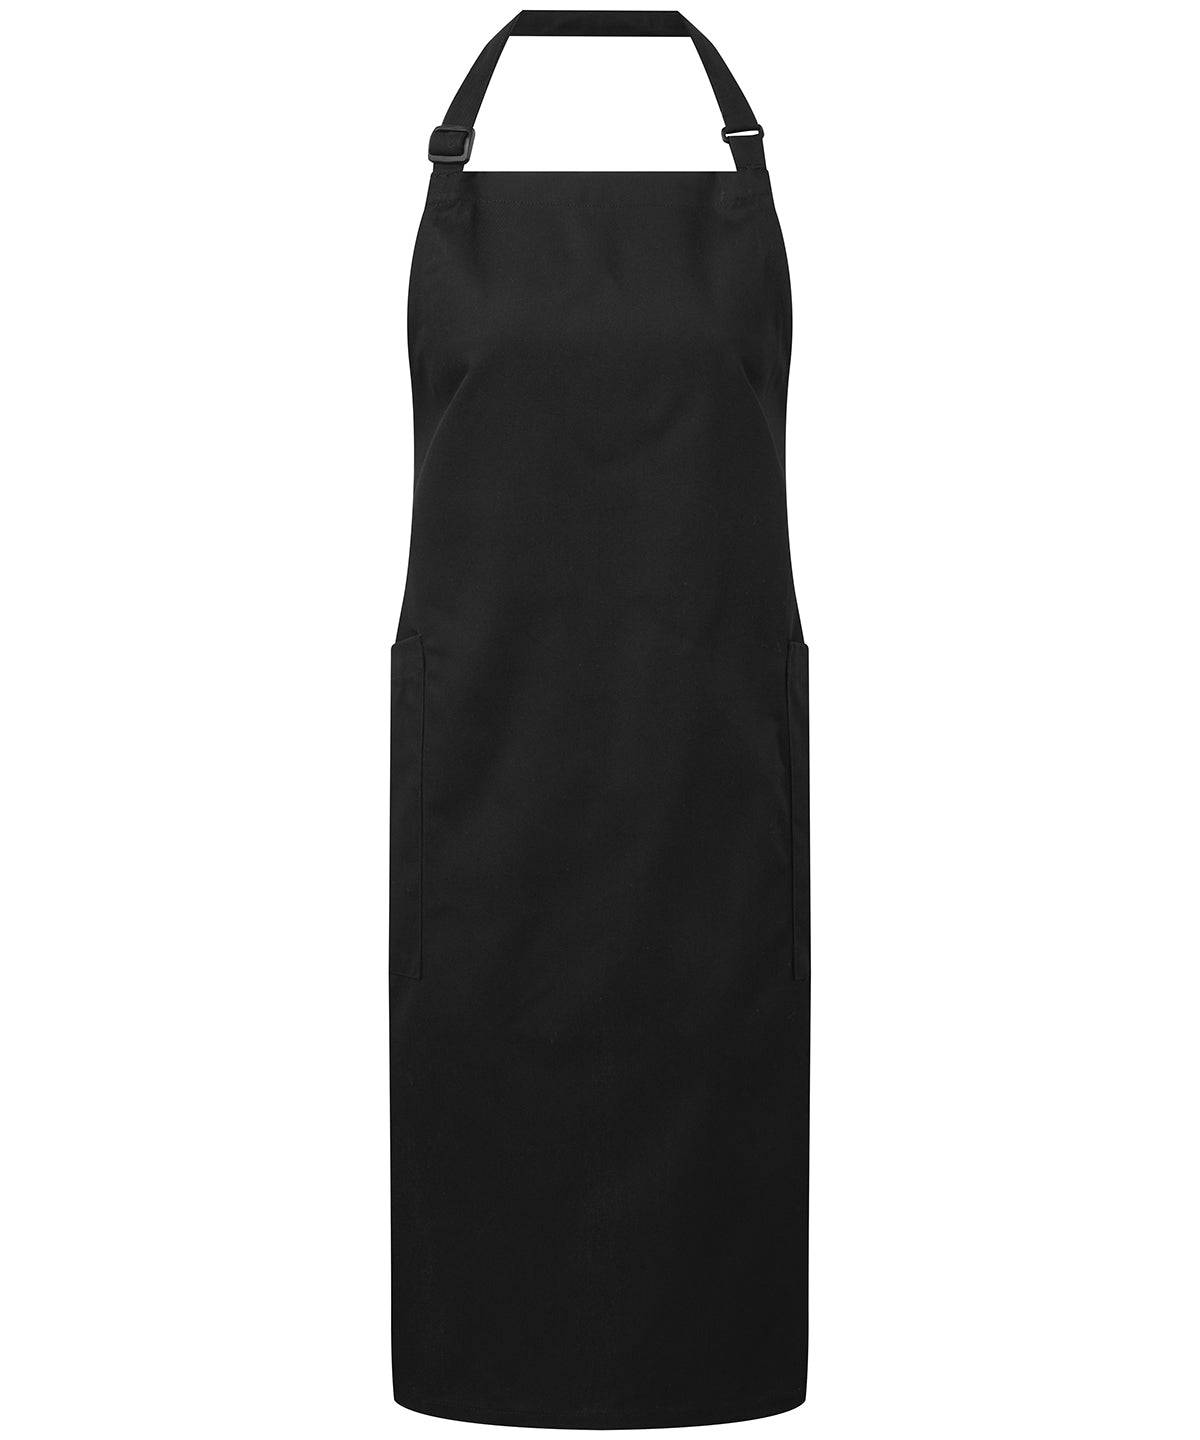 Black - Recycled Polyester & Organic Cotton Apron